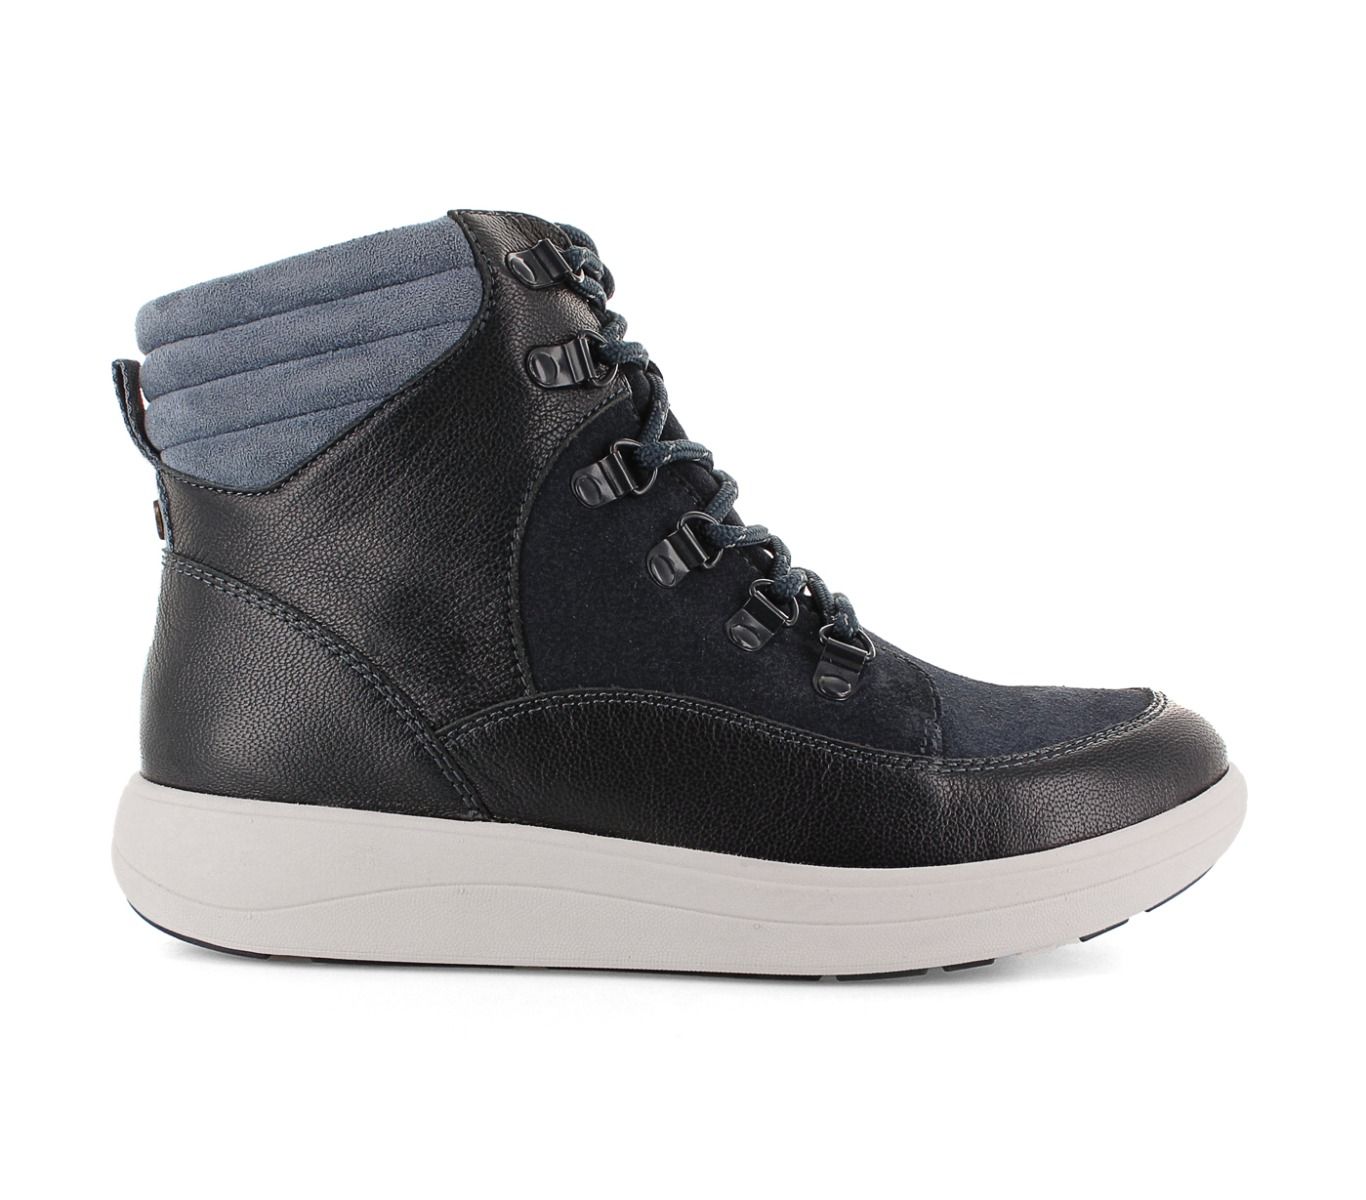 Strive Cotswold Boot - Durkins